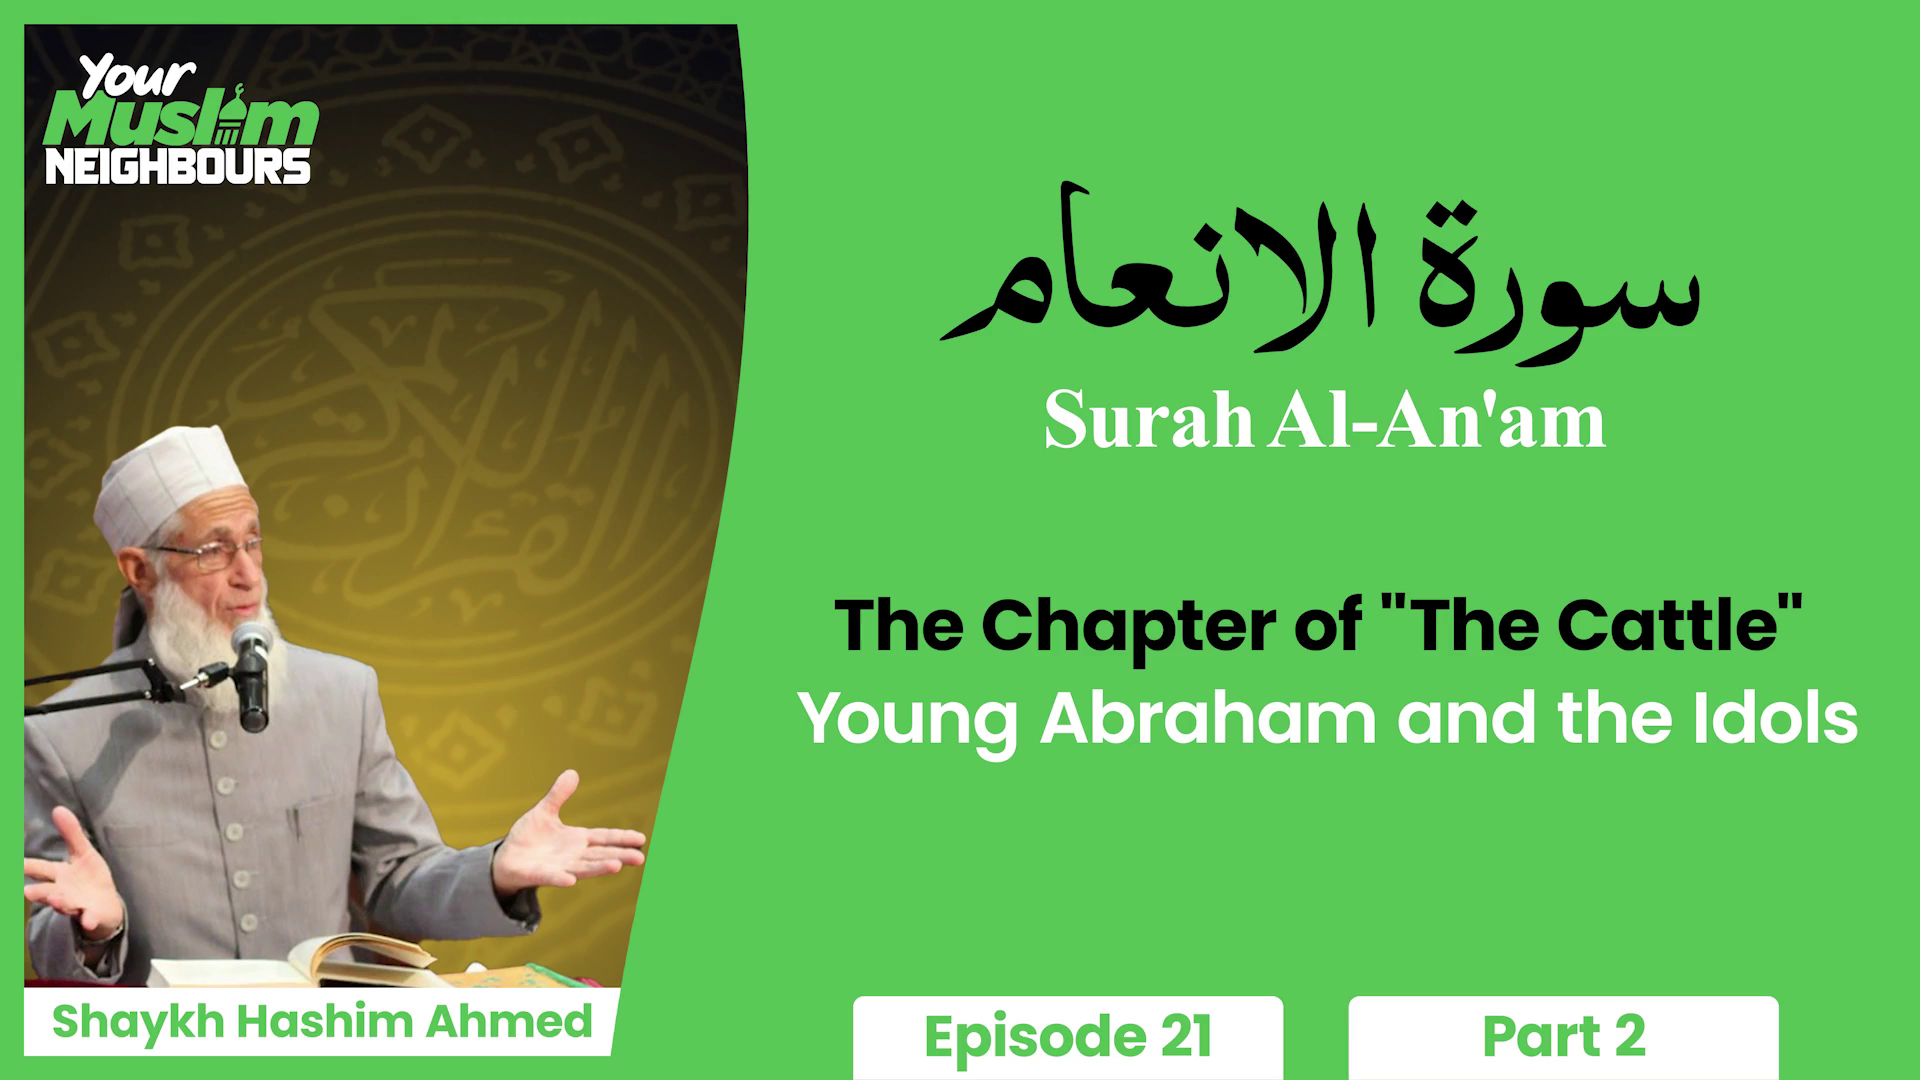 Young Abraham and the Idols | Surah Al-An'am (The Chapter of "The Cattle")